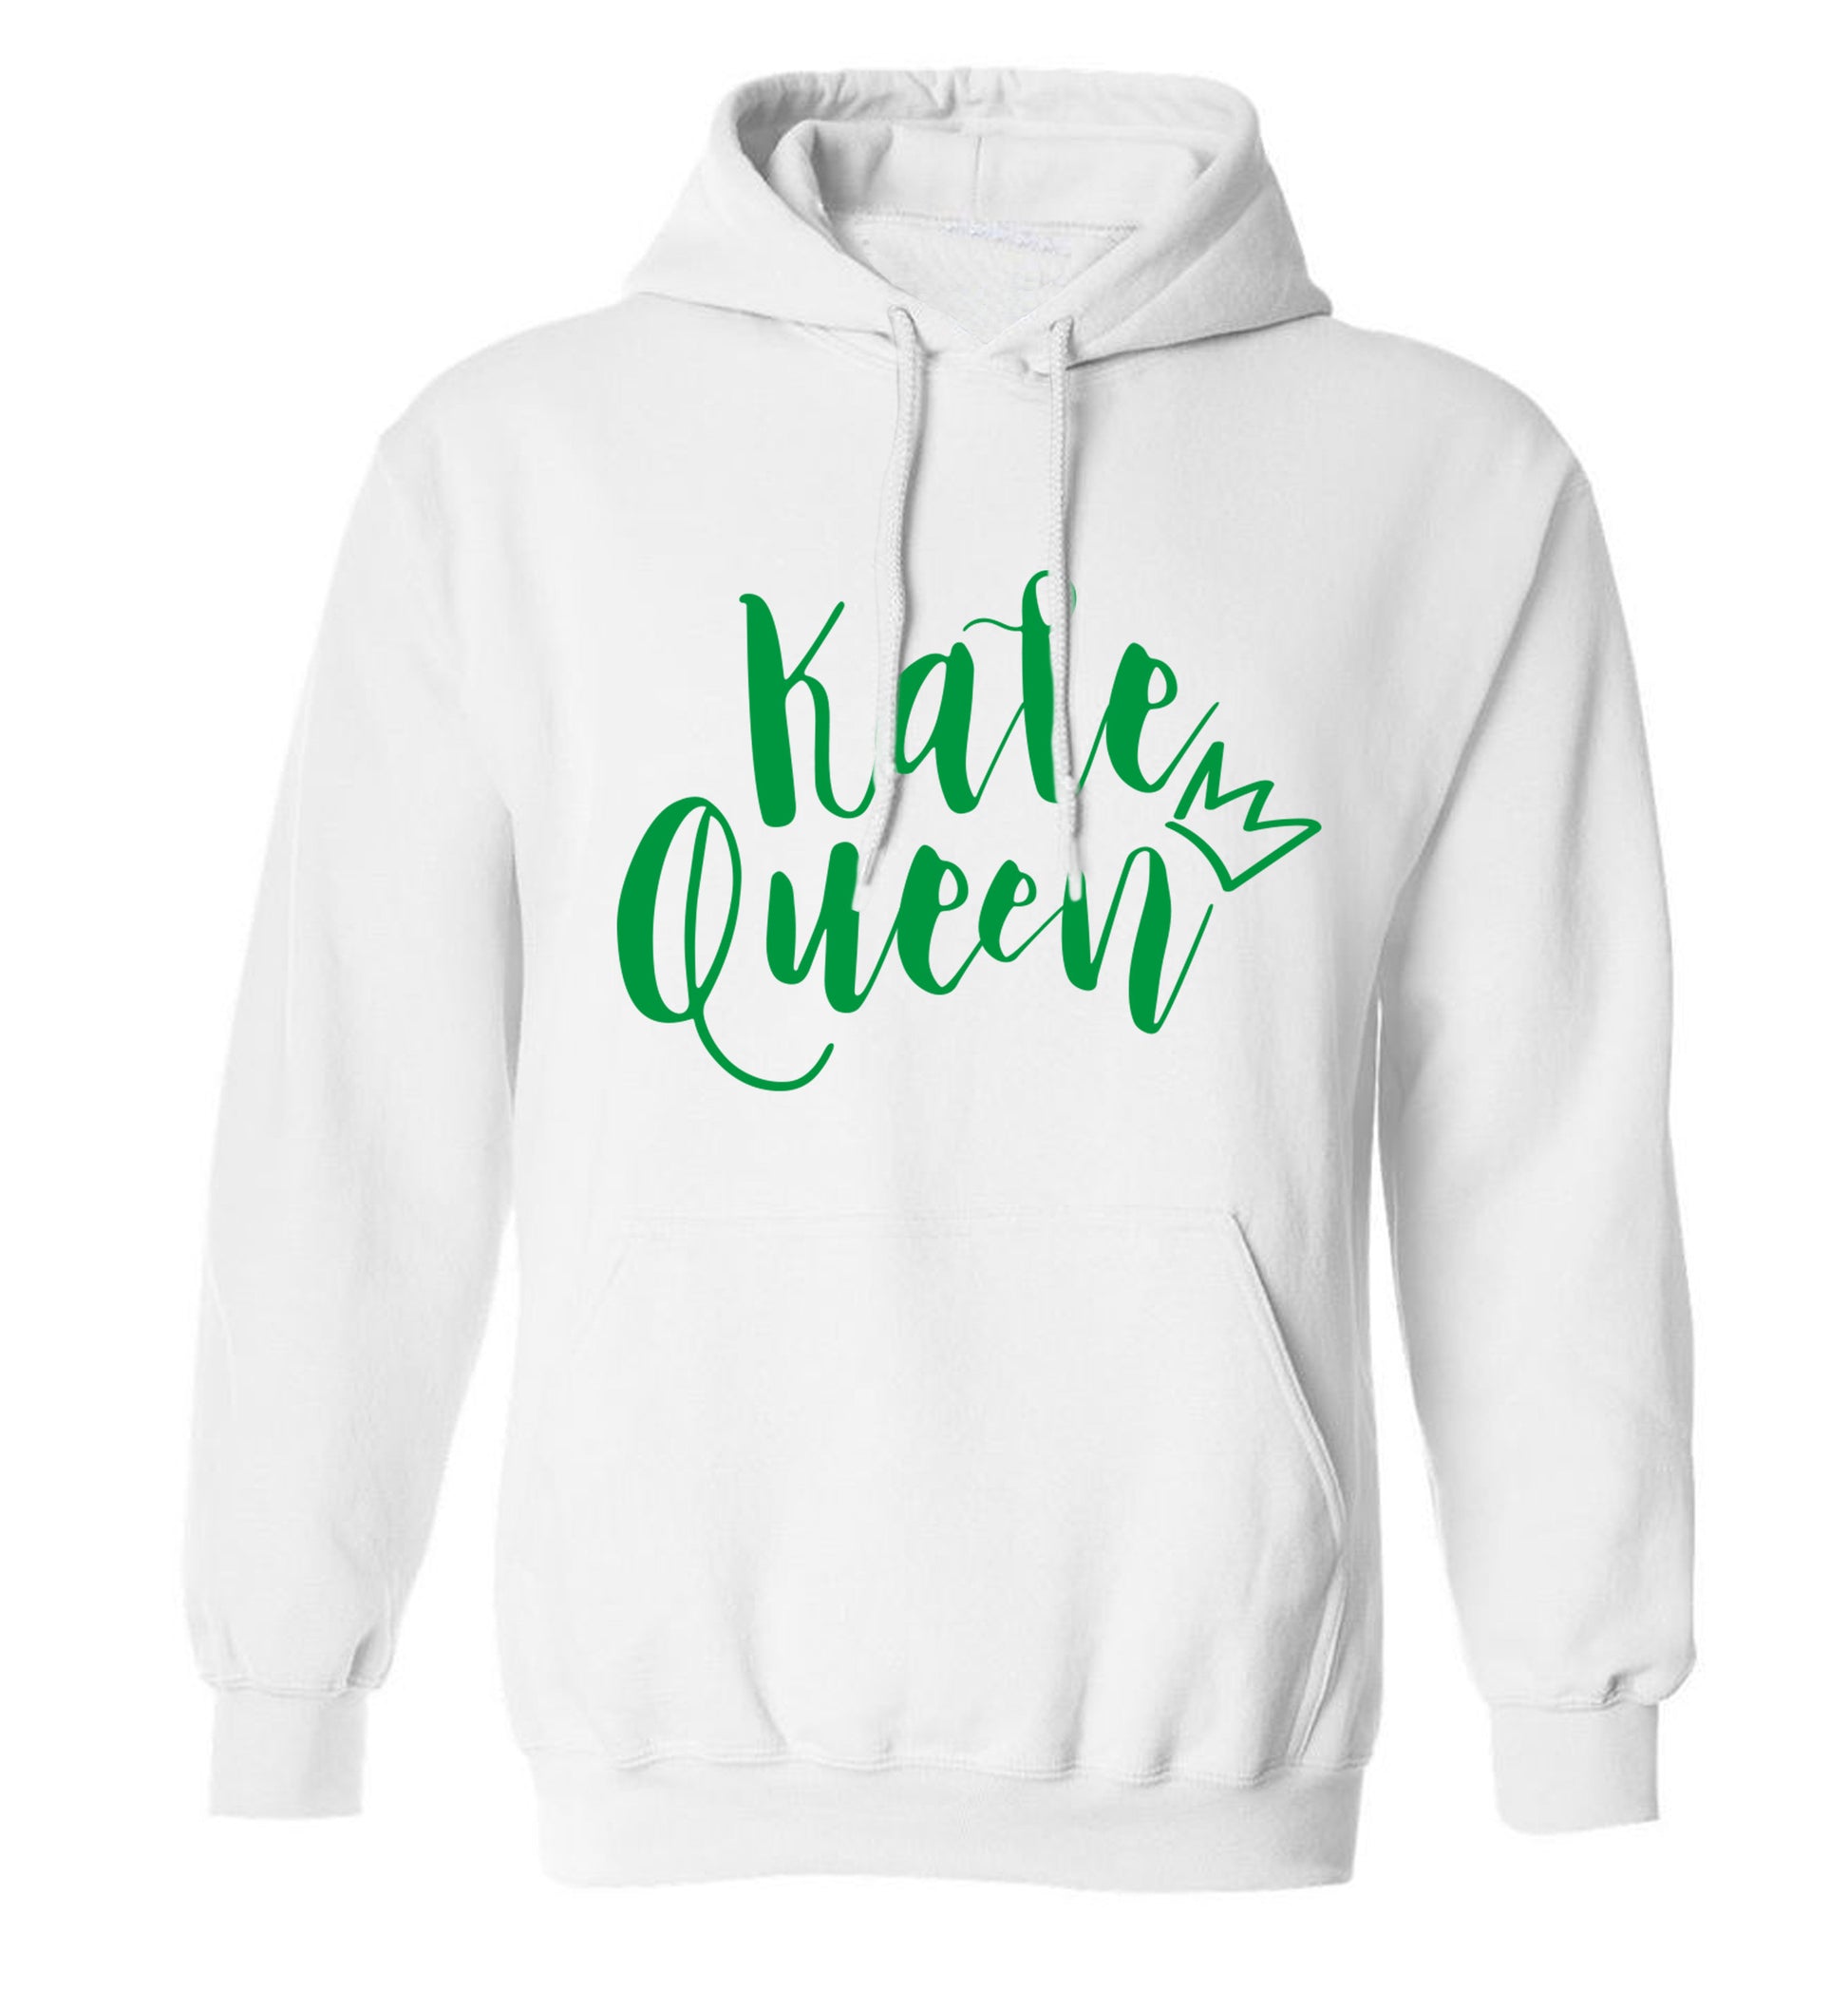 Kale Queen adults unisex white hoodie 2XL